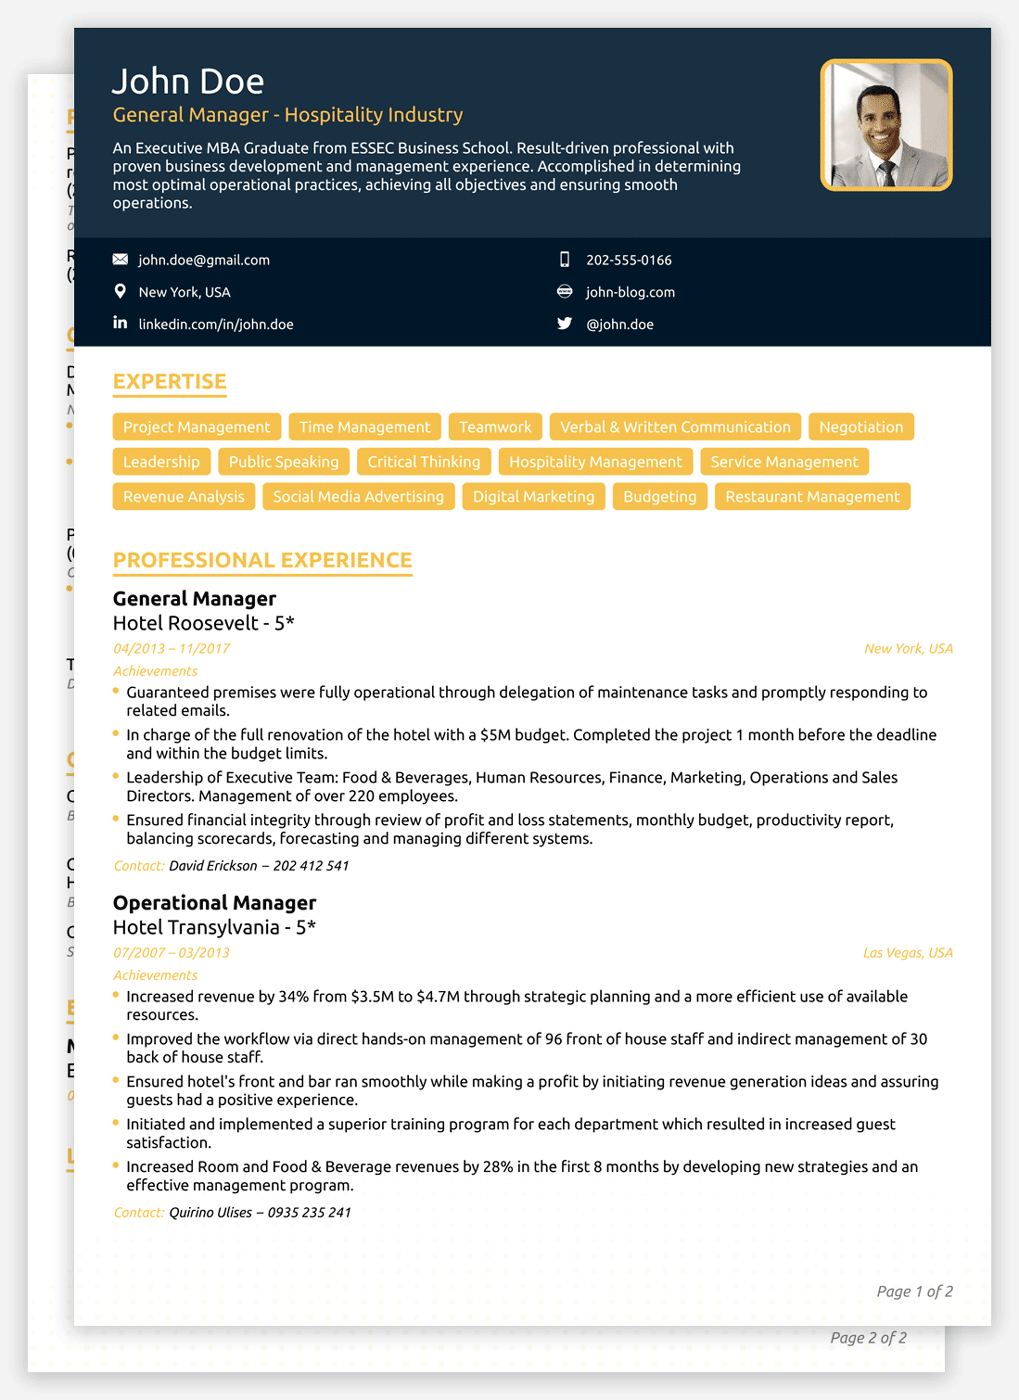 8 Cv Templates Curriculum Vitae Updated For 2020 with dimensions 1019 X 1400